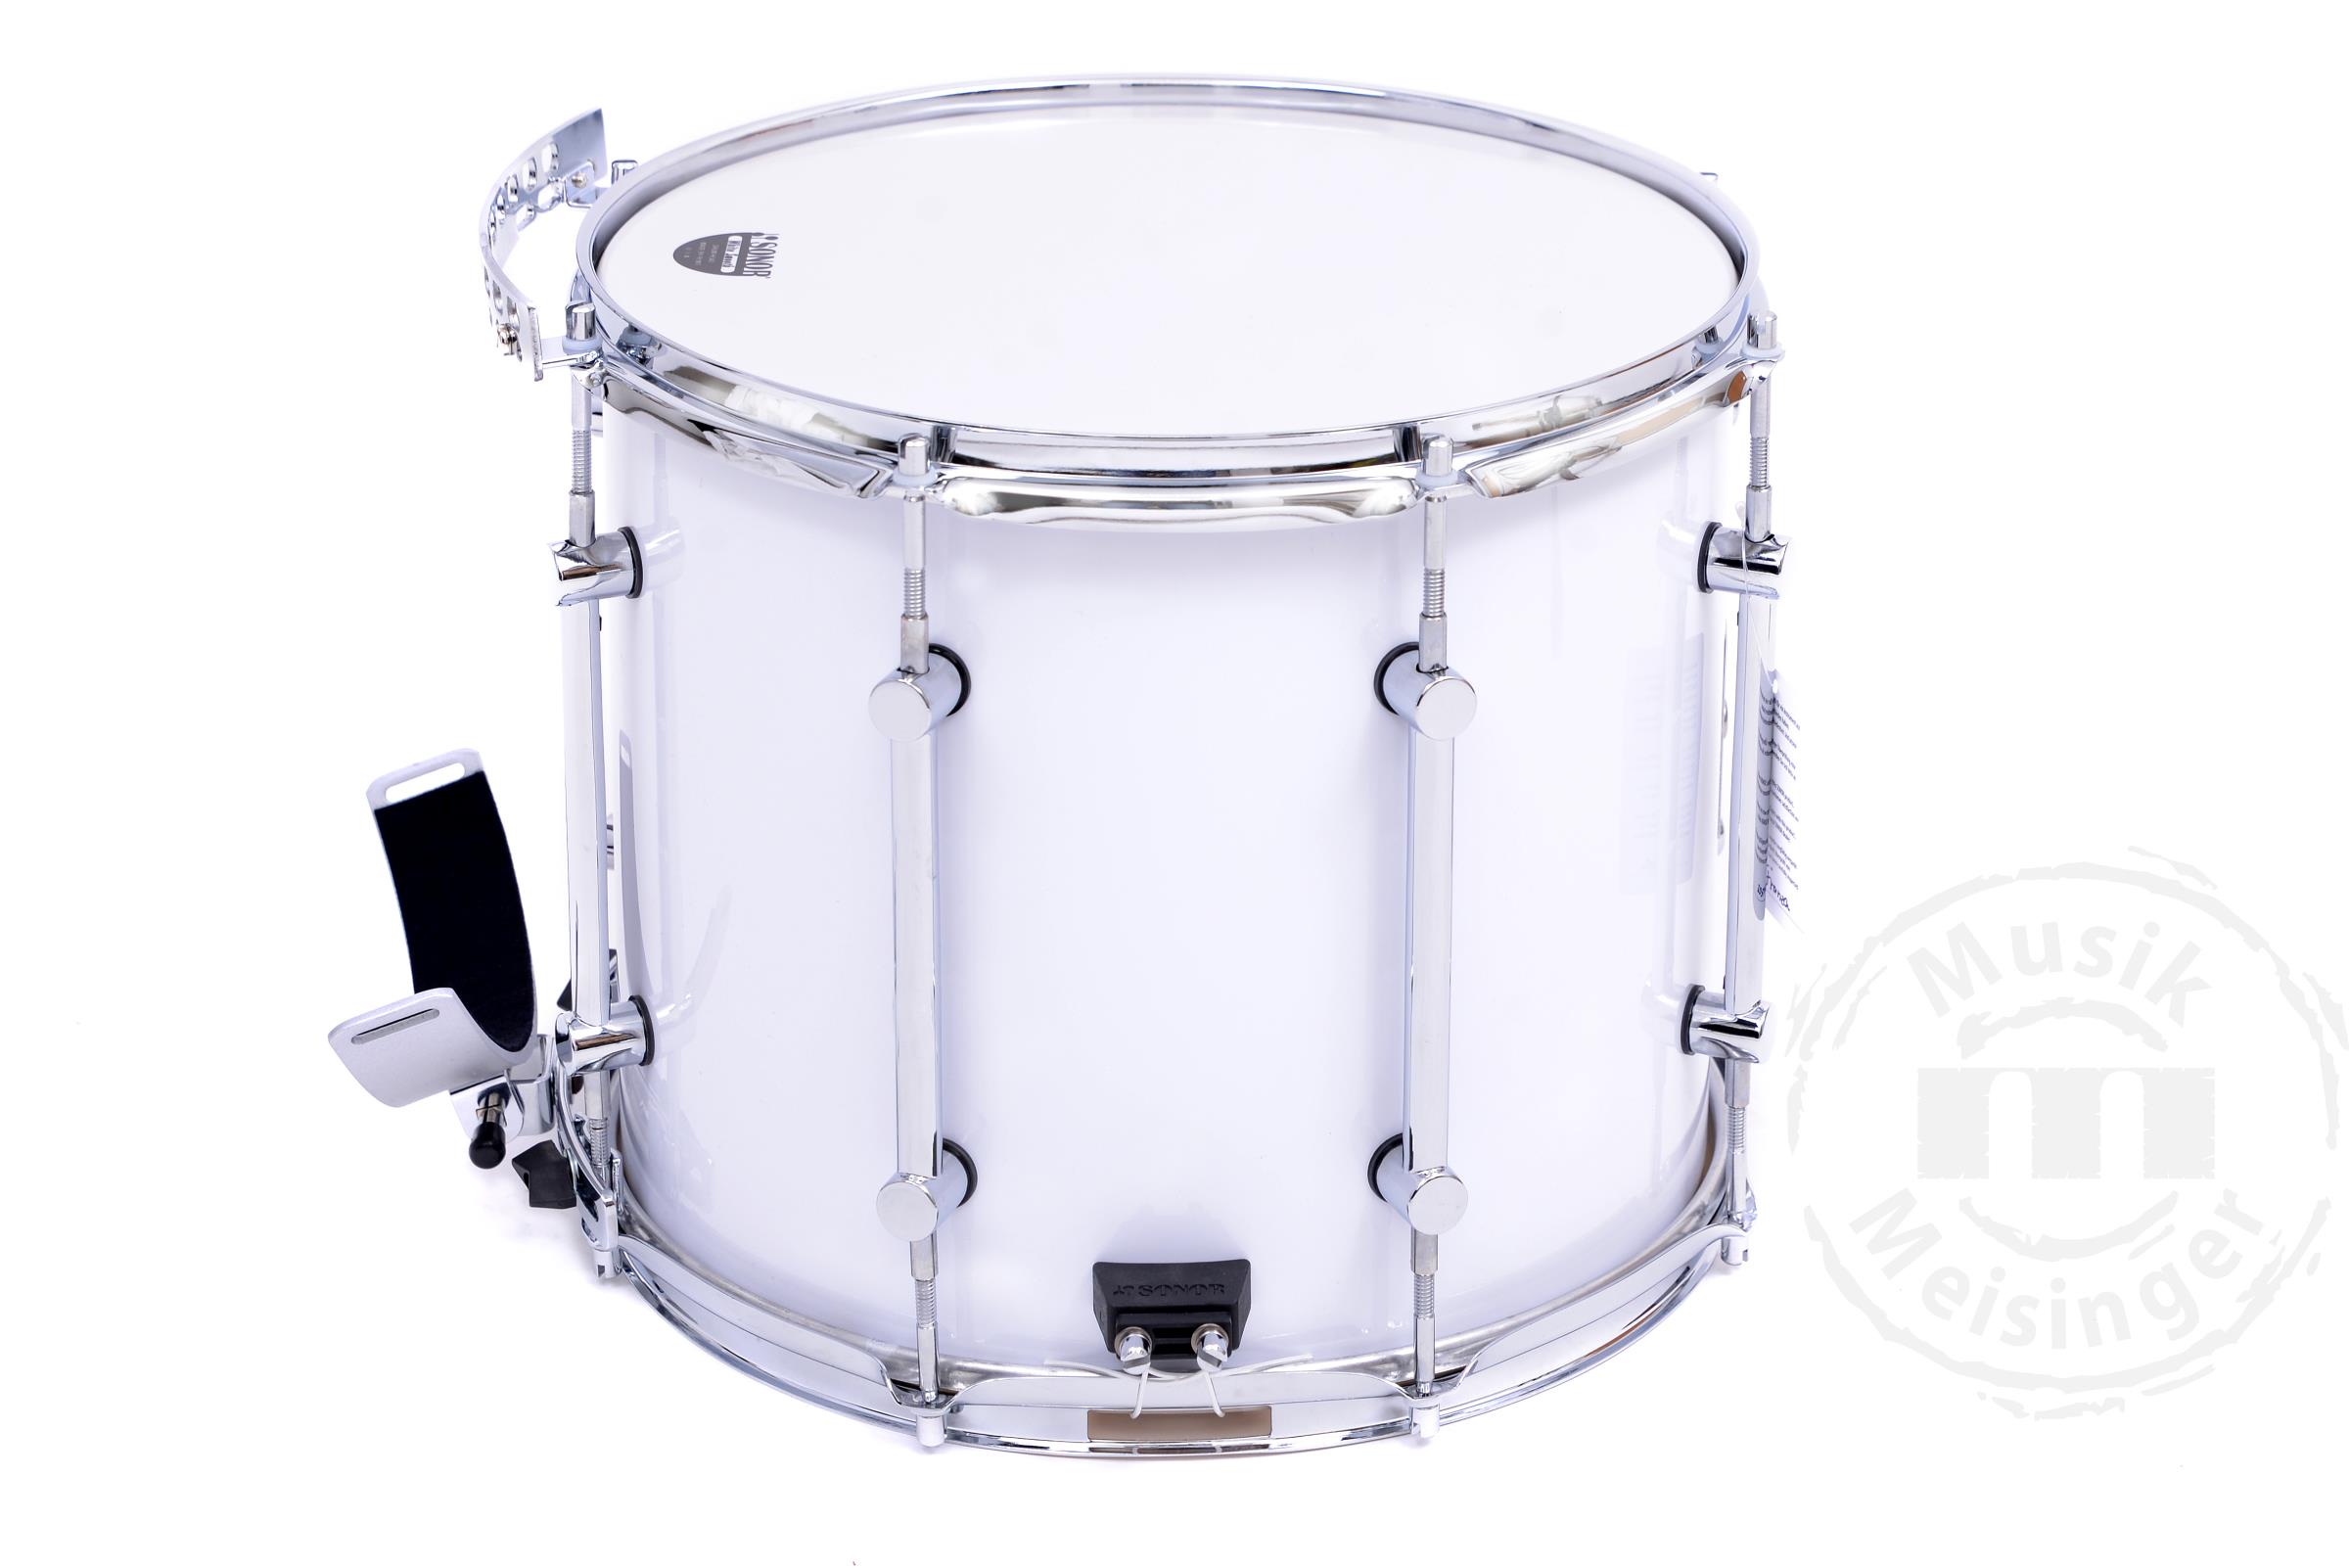 Sonor MB 1412 CW Parade Snare Weiß